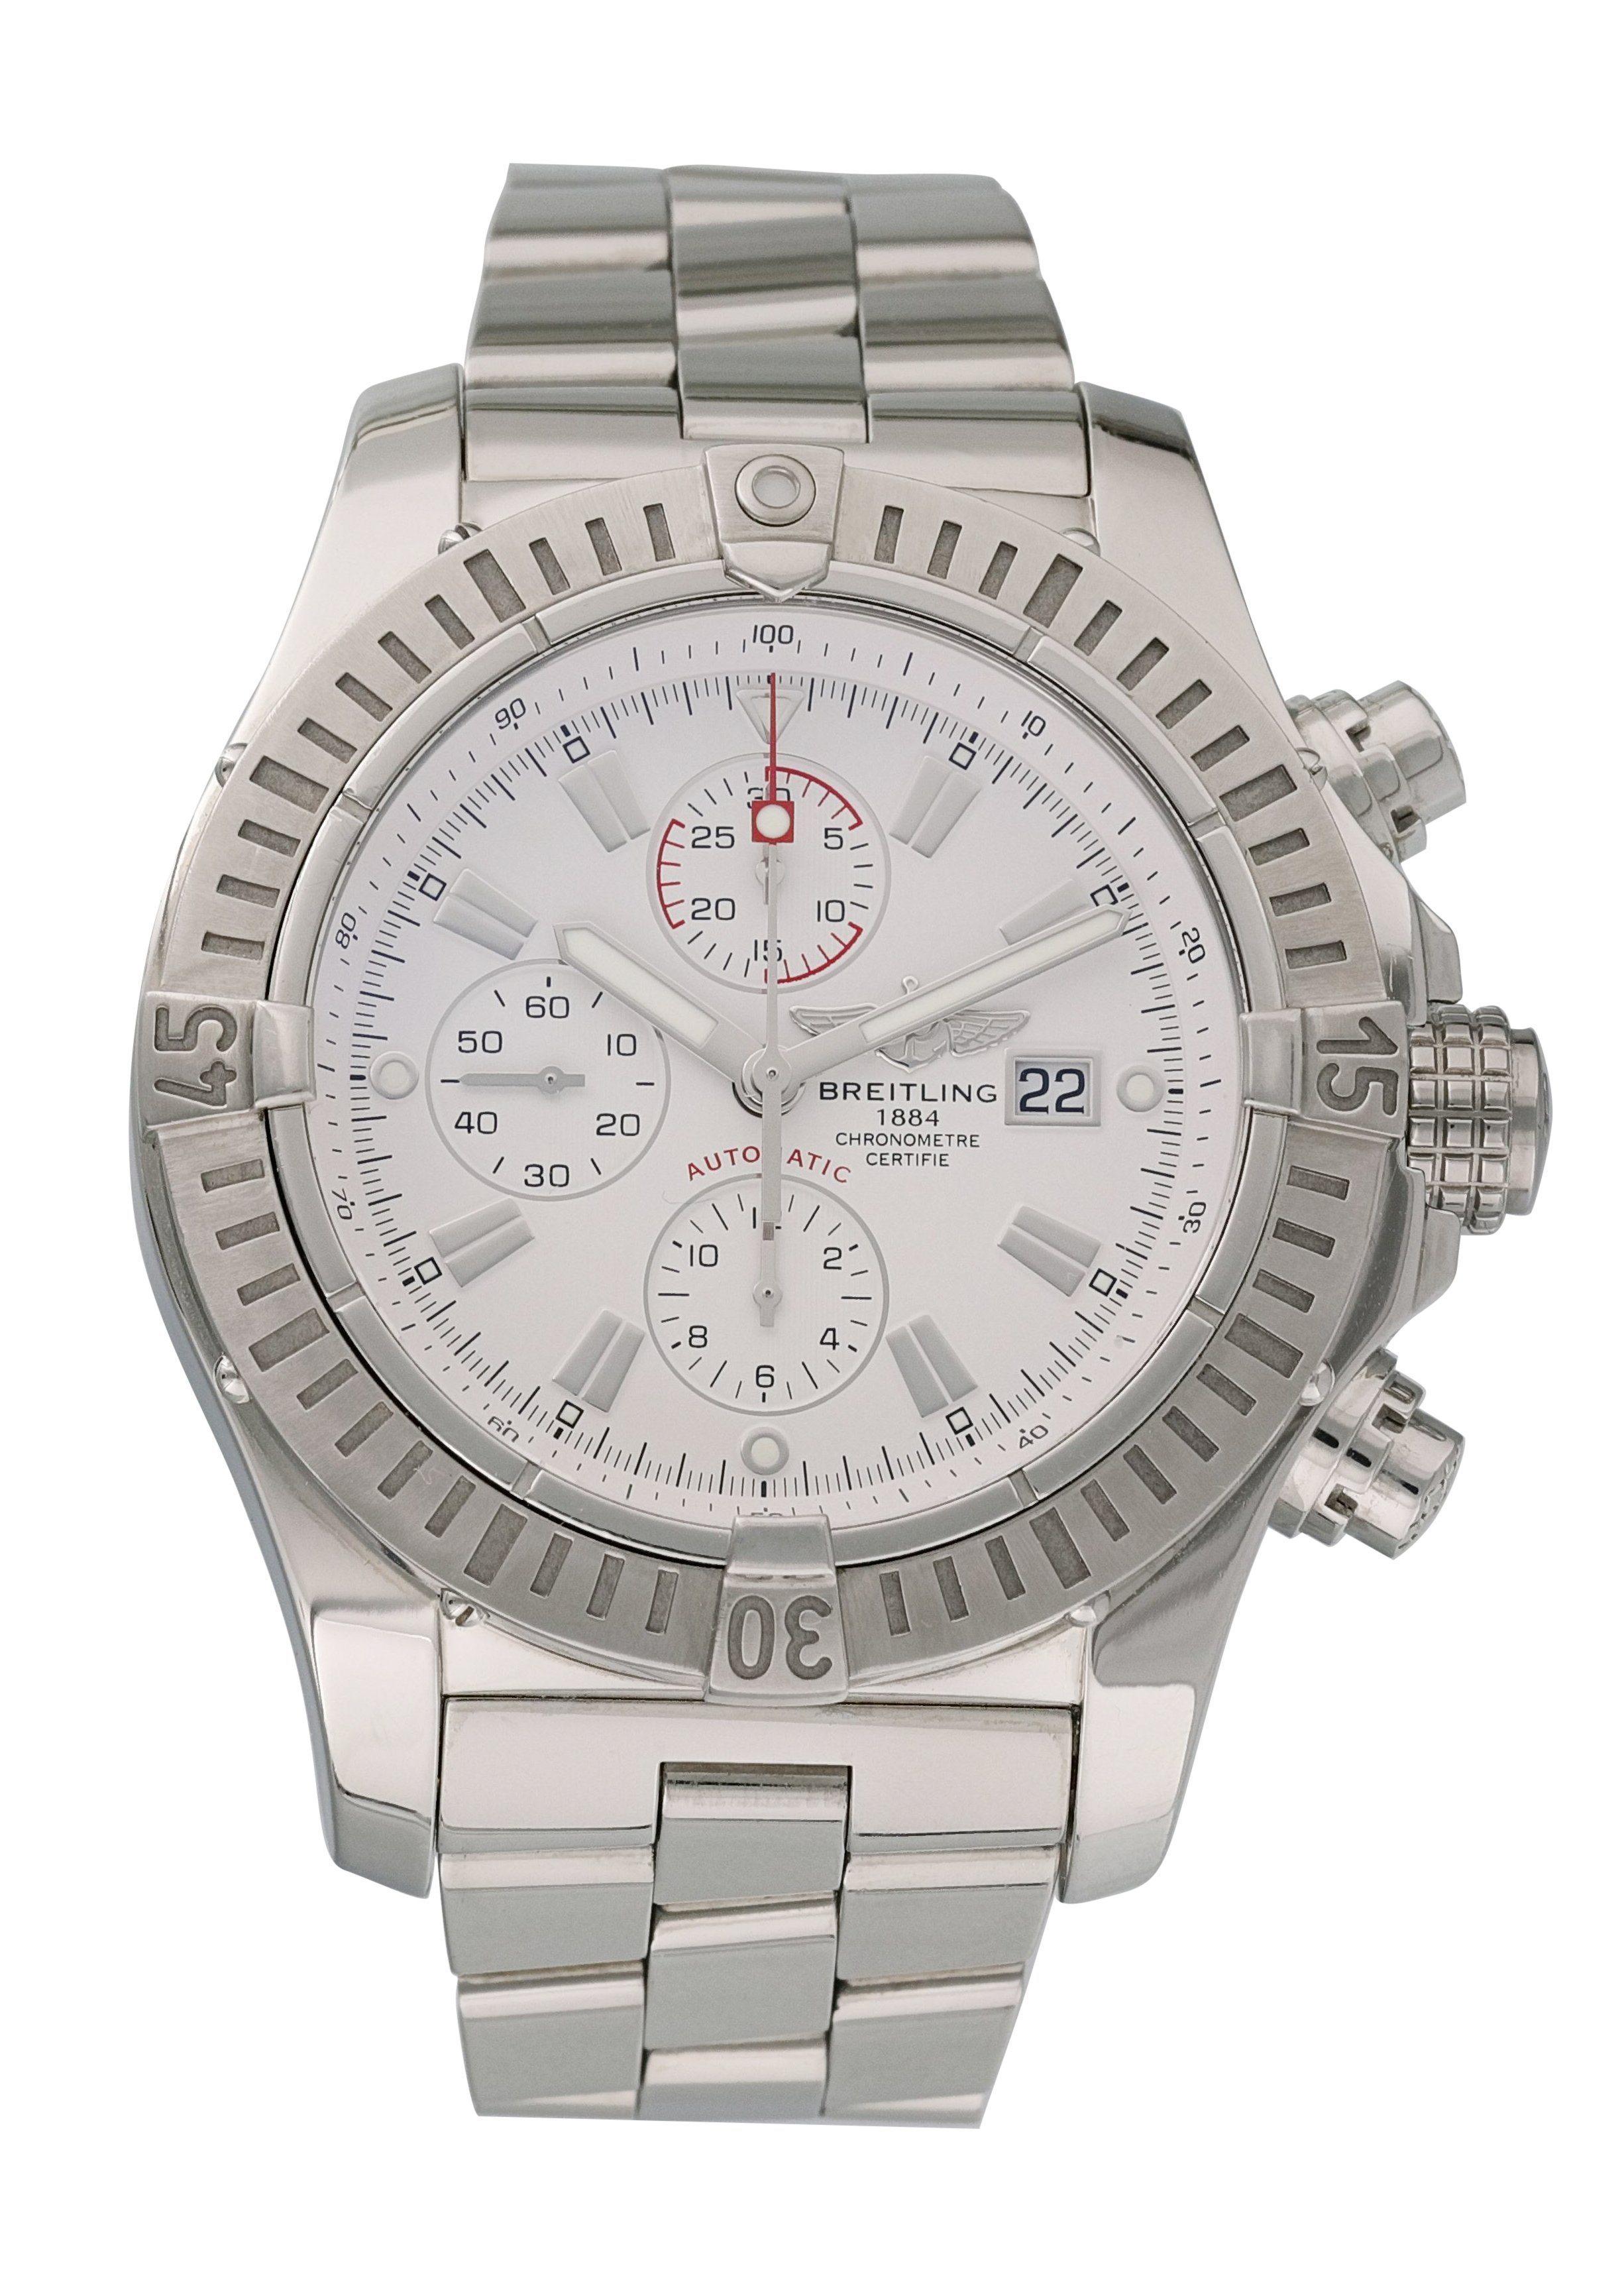 Breitling Super Avenger  A13370 Men Watch. 
48mm Stainless Steel case. 
Stainless Steel Unidirectional bezel. 
White dial with Luminous Steel hands and index hour markers. 
Minute markers on the outer dial. 
Date display at the 3 o'clock position.